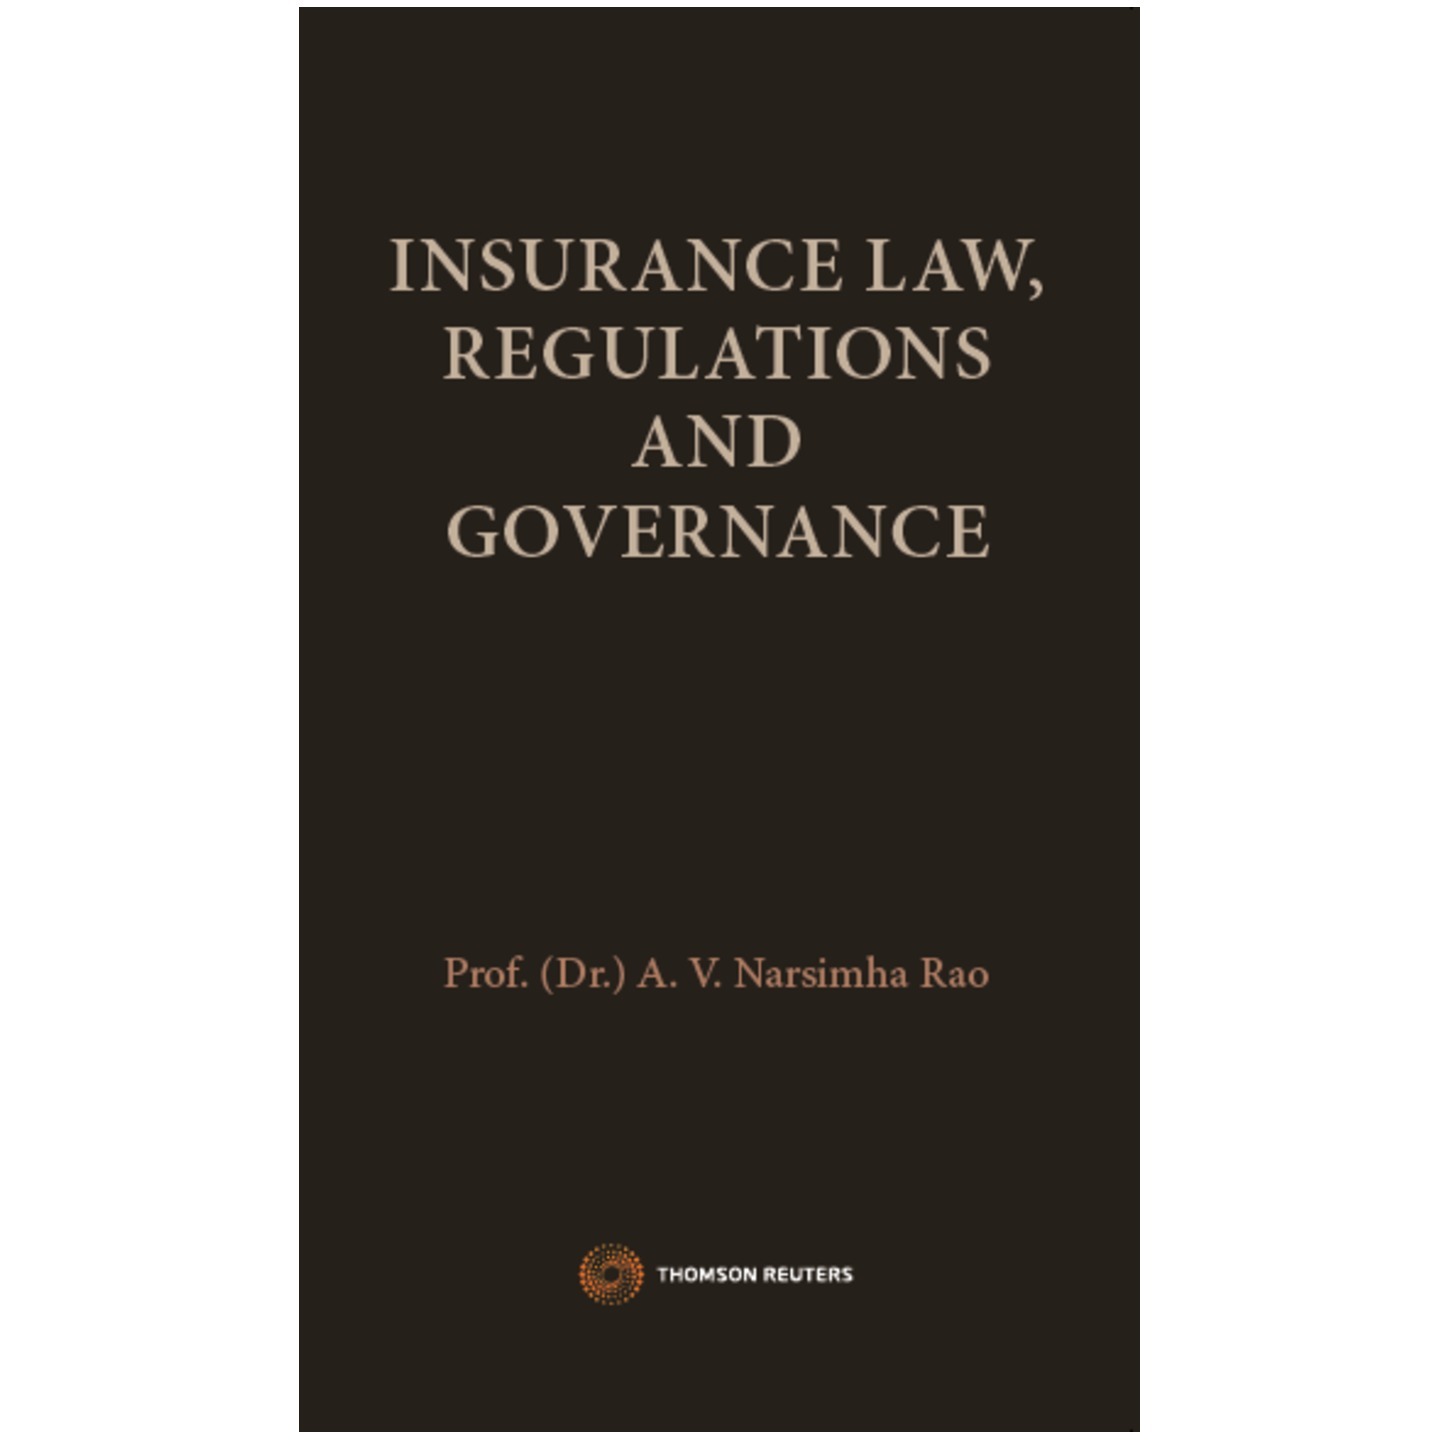 Insurance Law, Regulations and Governance